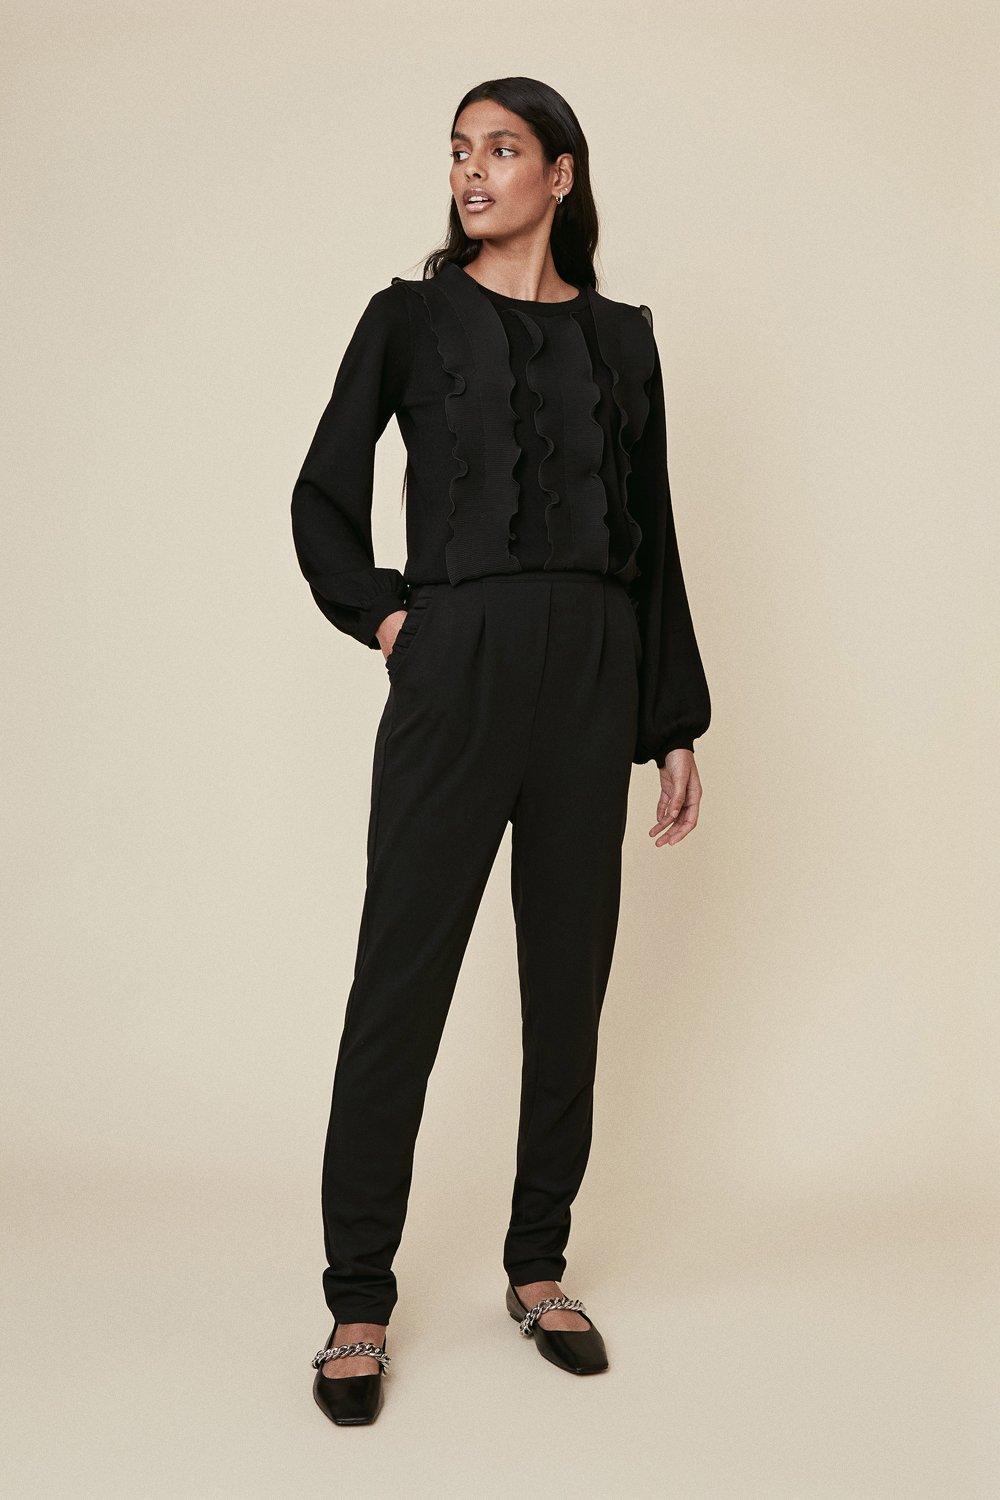 Oasis Frill Tapered Trousers | Debenhams